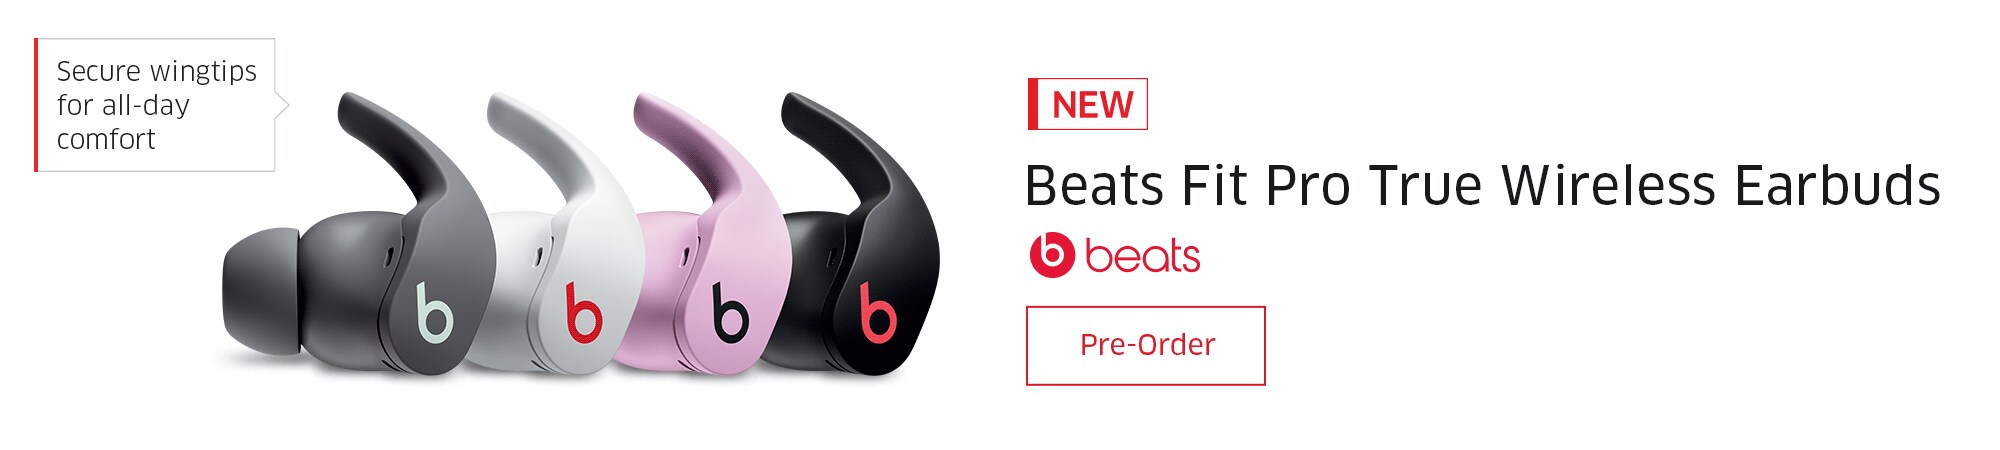 NEW Beats Fit Pro True Wireless Earbuds Pre-Order  Secure wingtips for all-day comfort